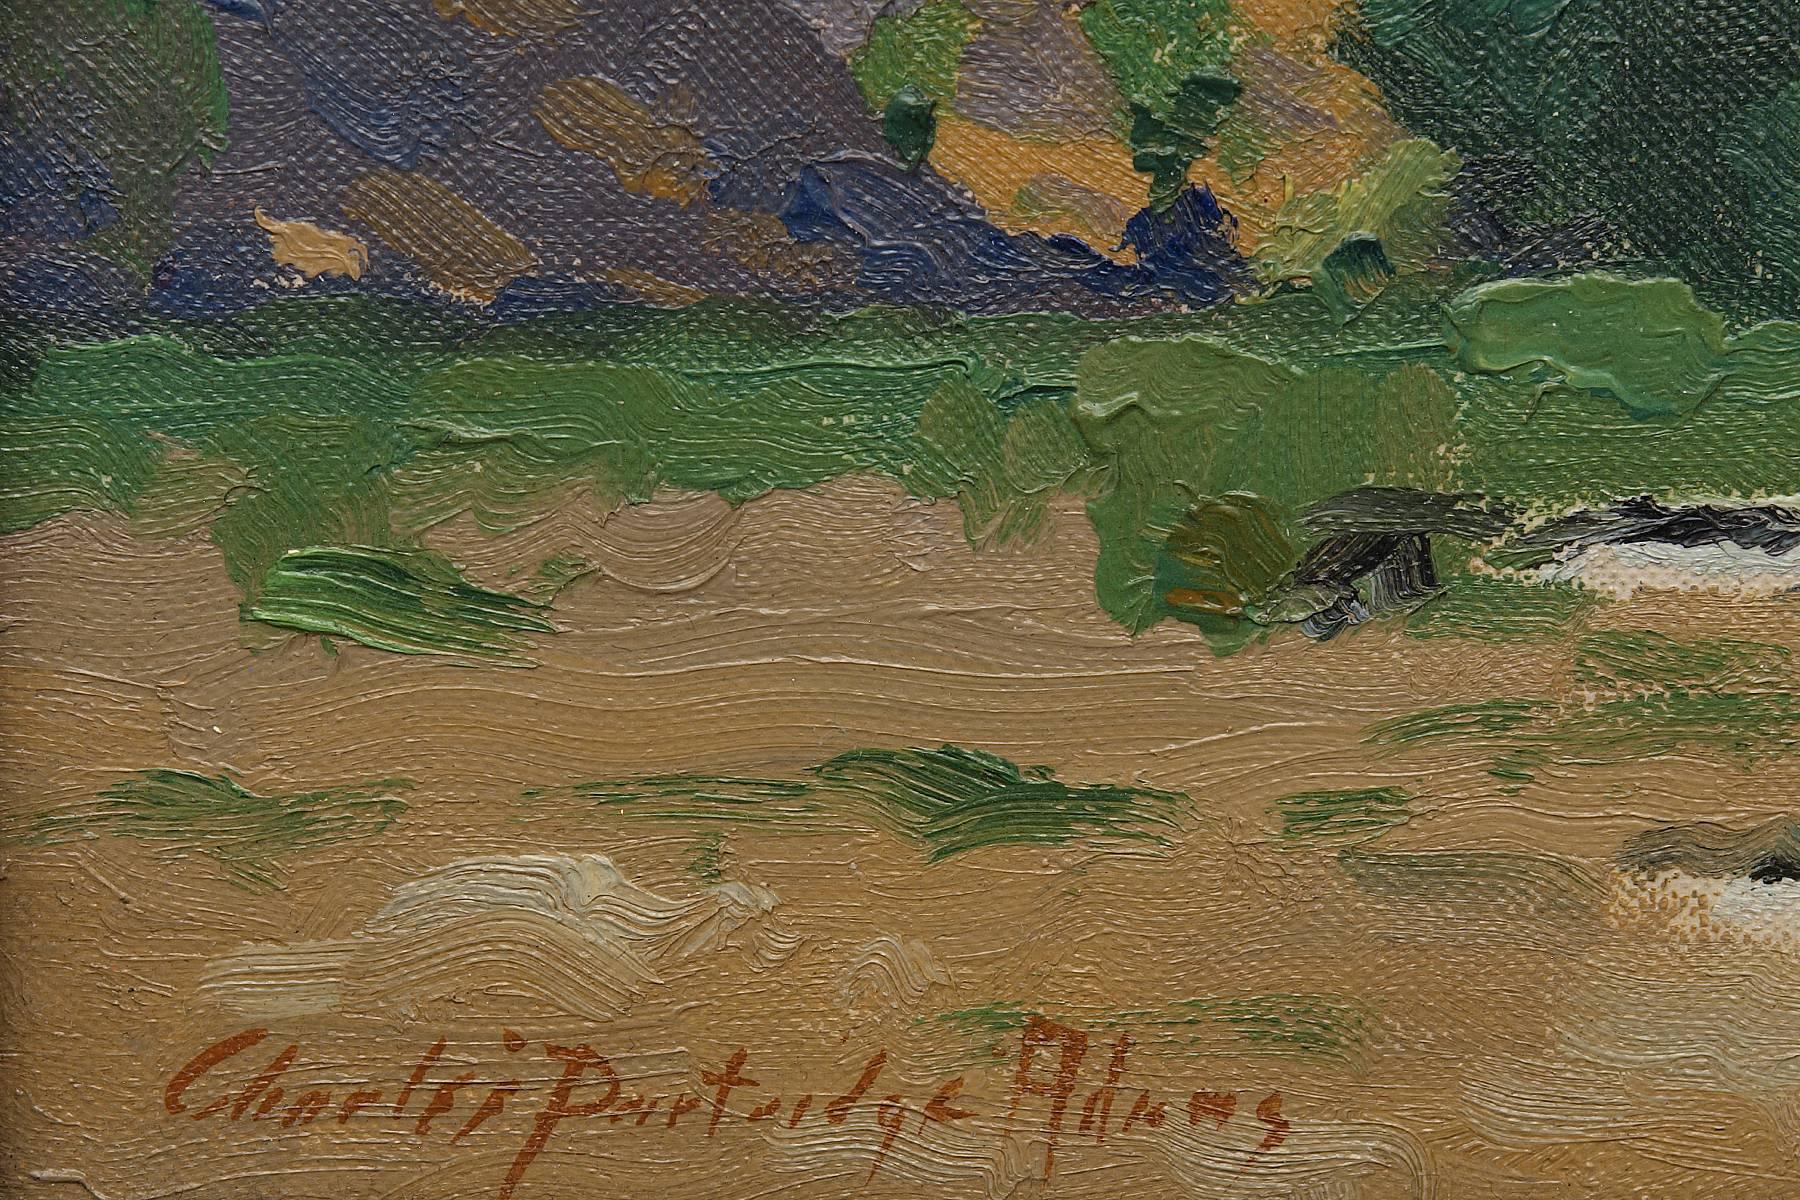 Untitled (California landscape) - American Impressionist Painting by Charles Partridge Adams